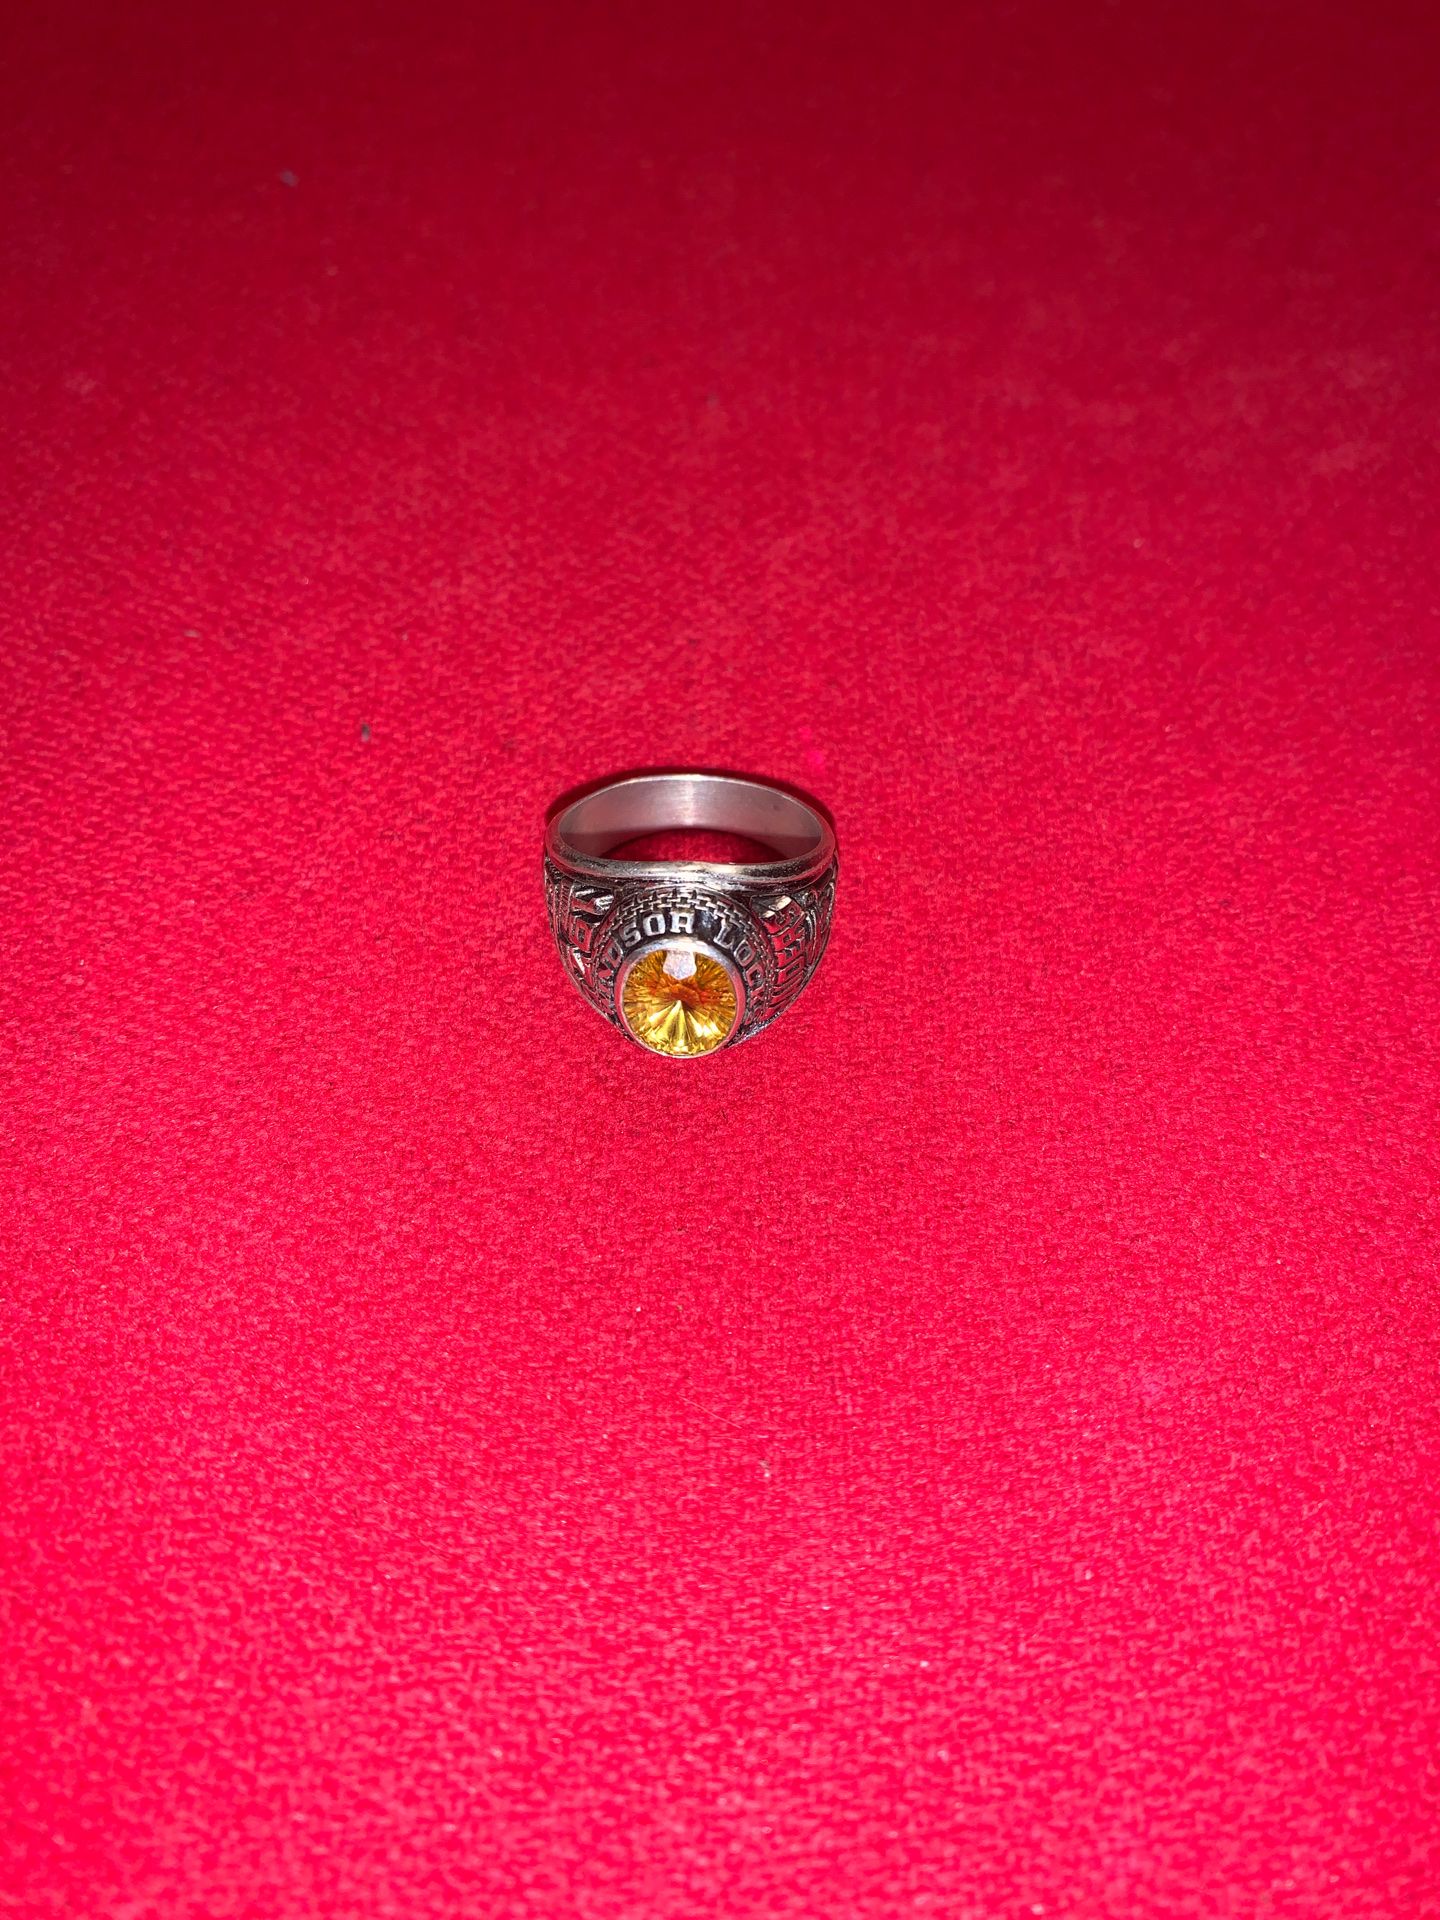 Silver Class Ring 1979